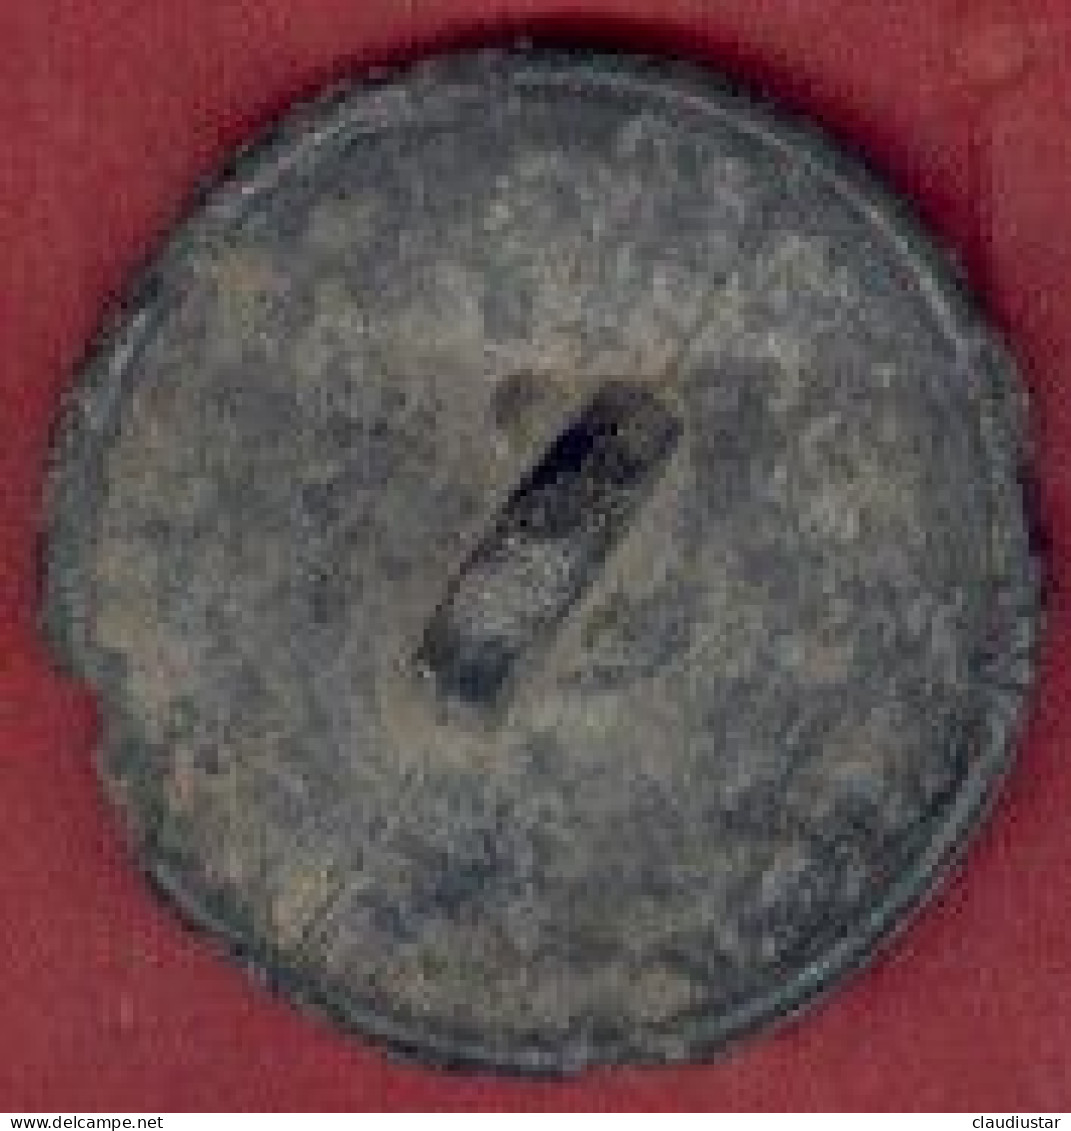 ** BOUTON  GARDE  NATIONALE  SEDENTAIRE  G. M. ** - Buttons